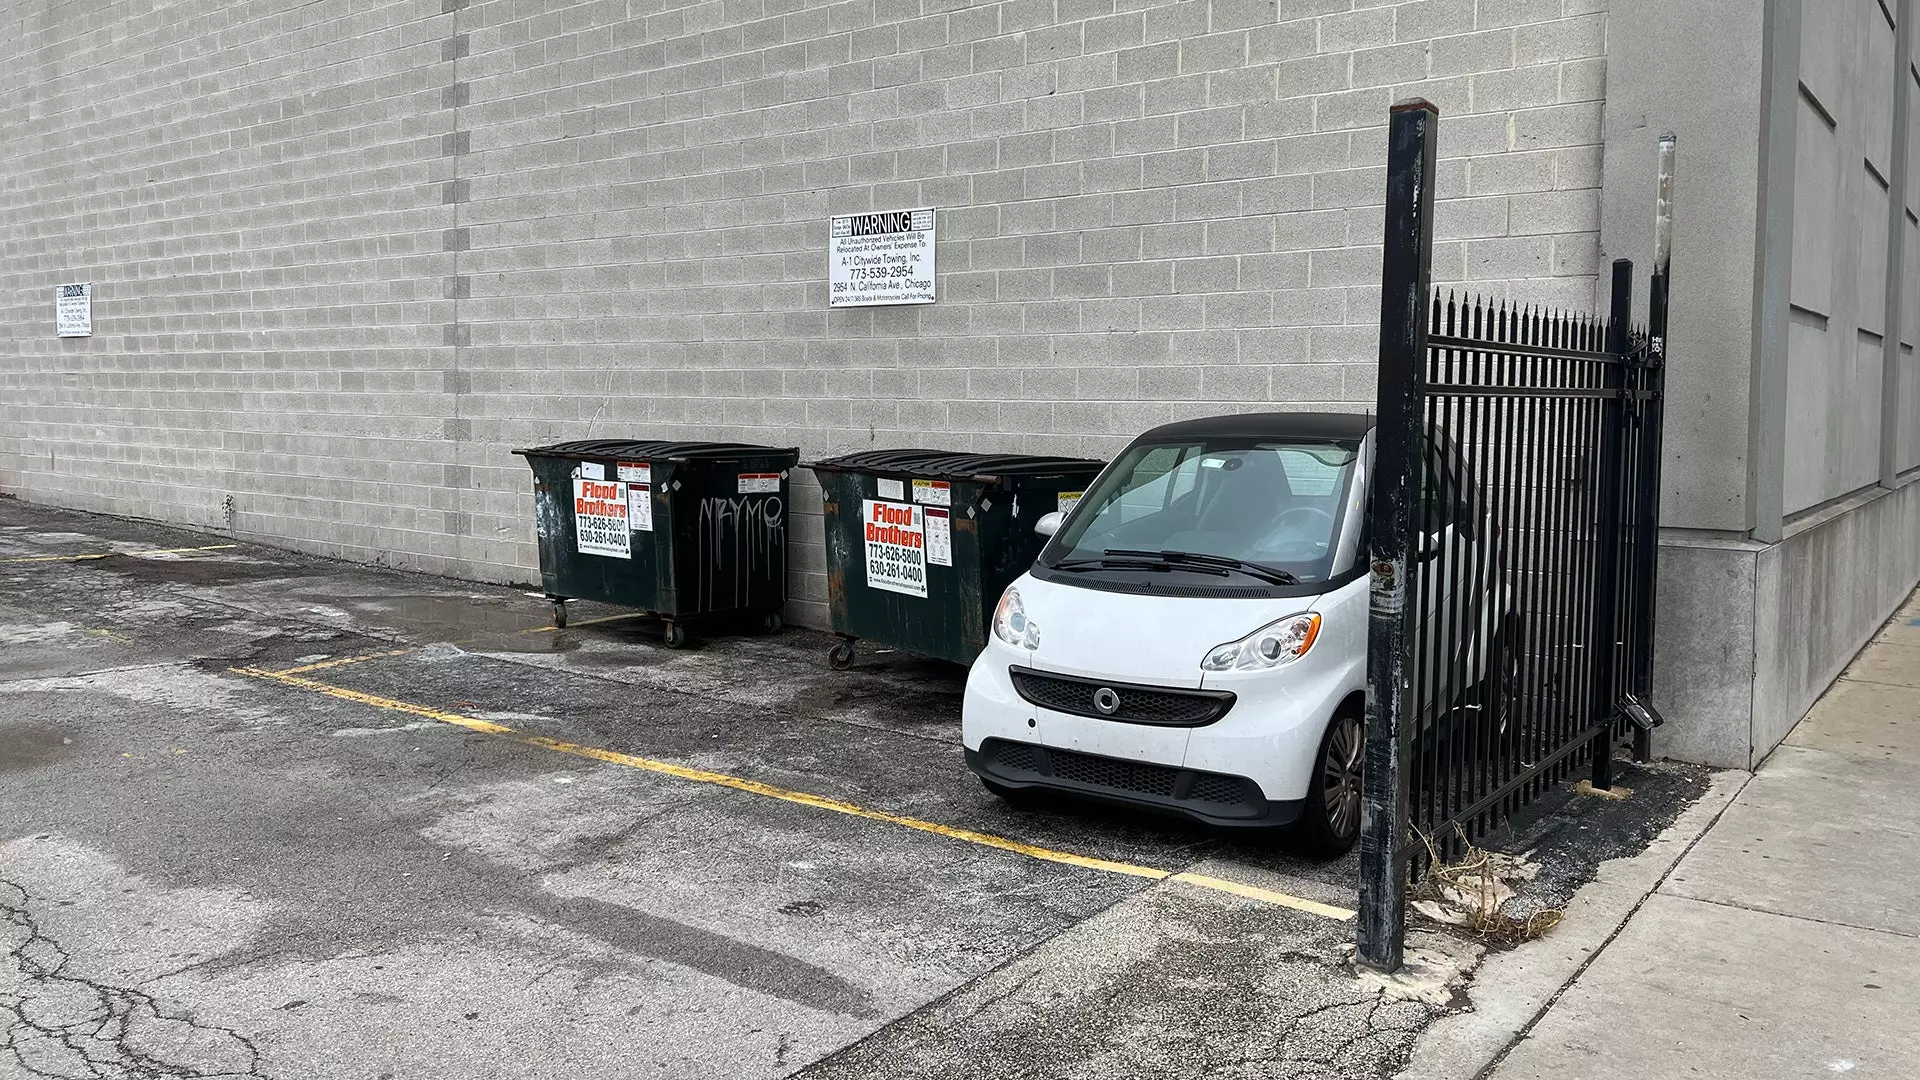 Dumpster Diving With a Smart Car